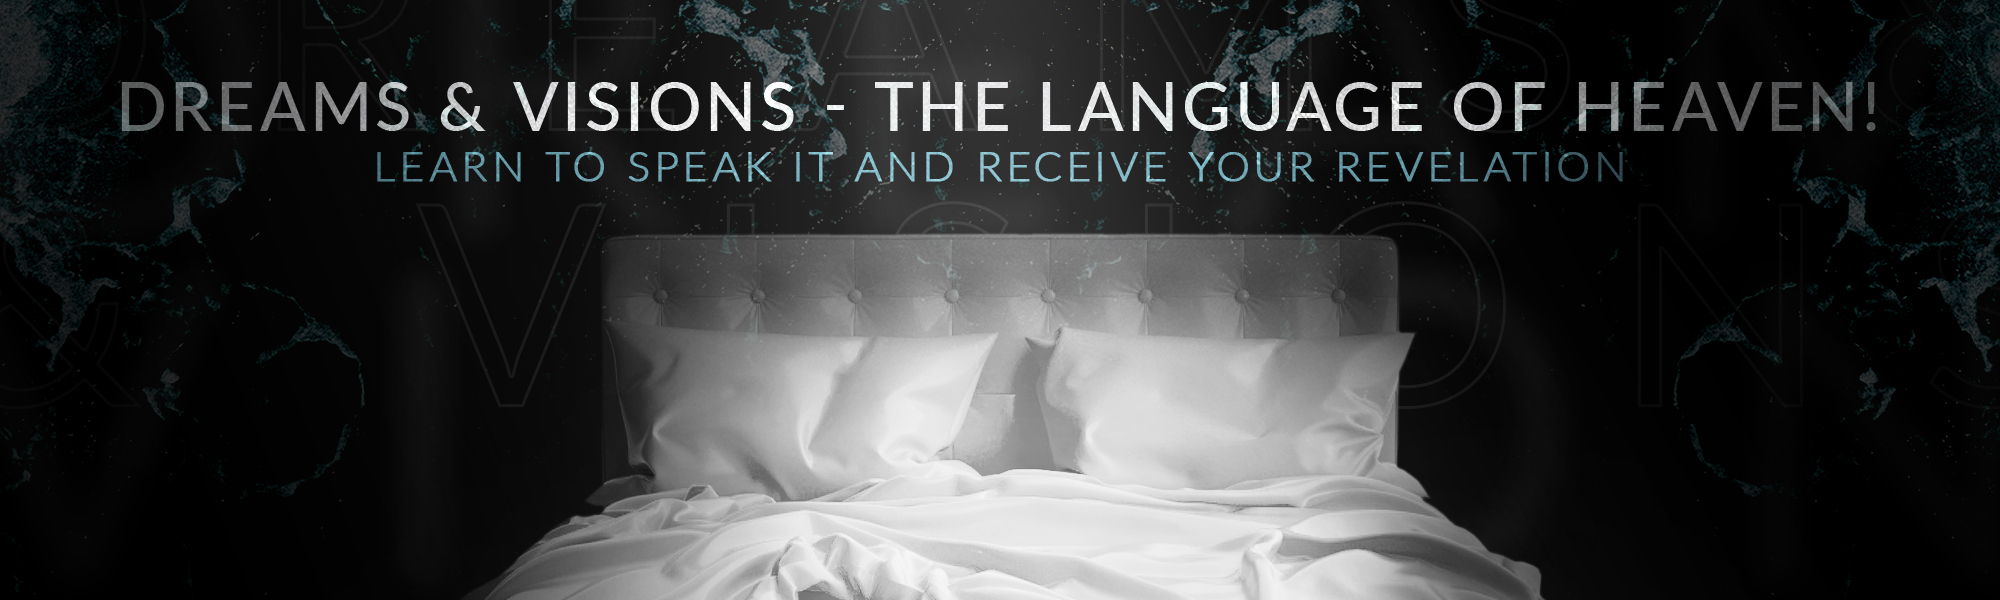 Dreams & Visions - The Language of Heaven! Learn to speak it and receive your revelation